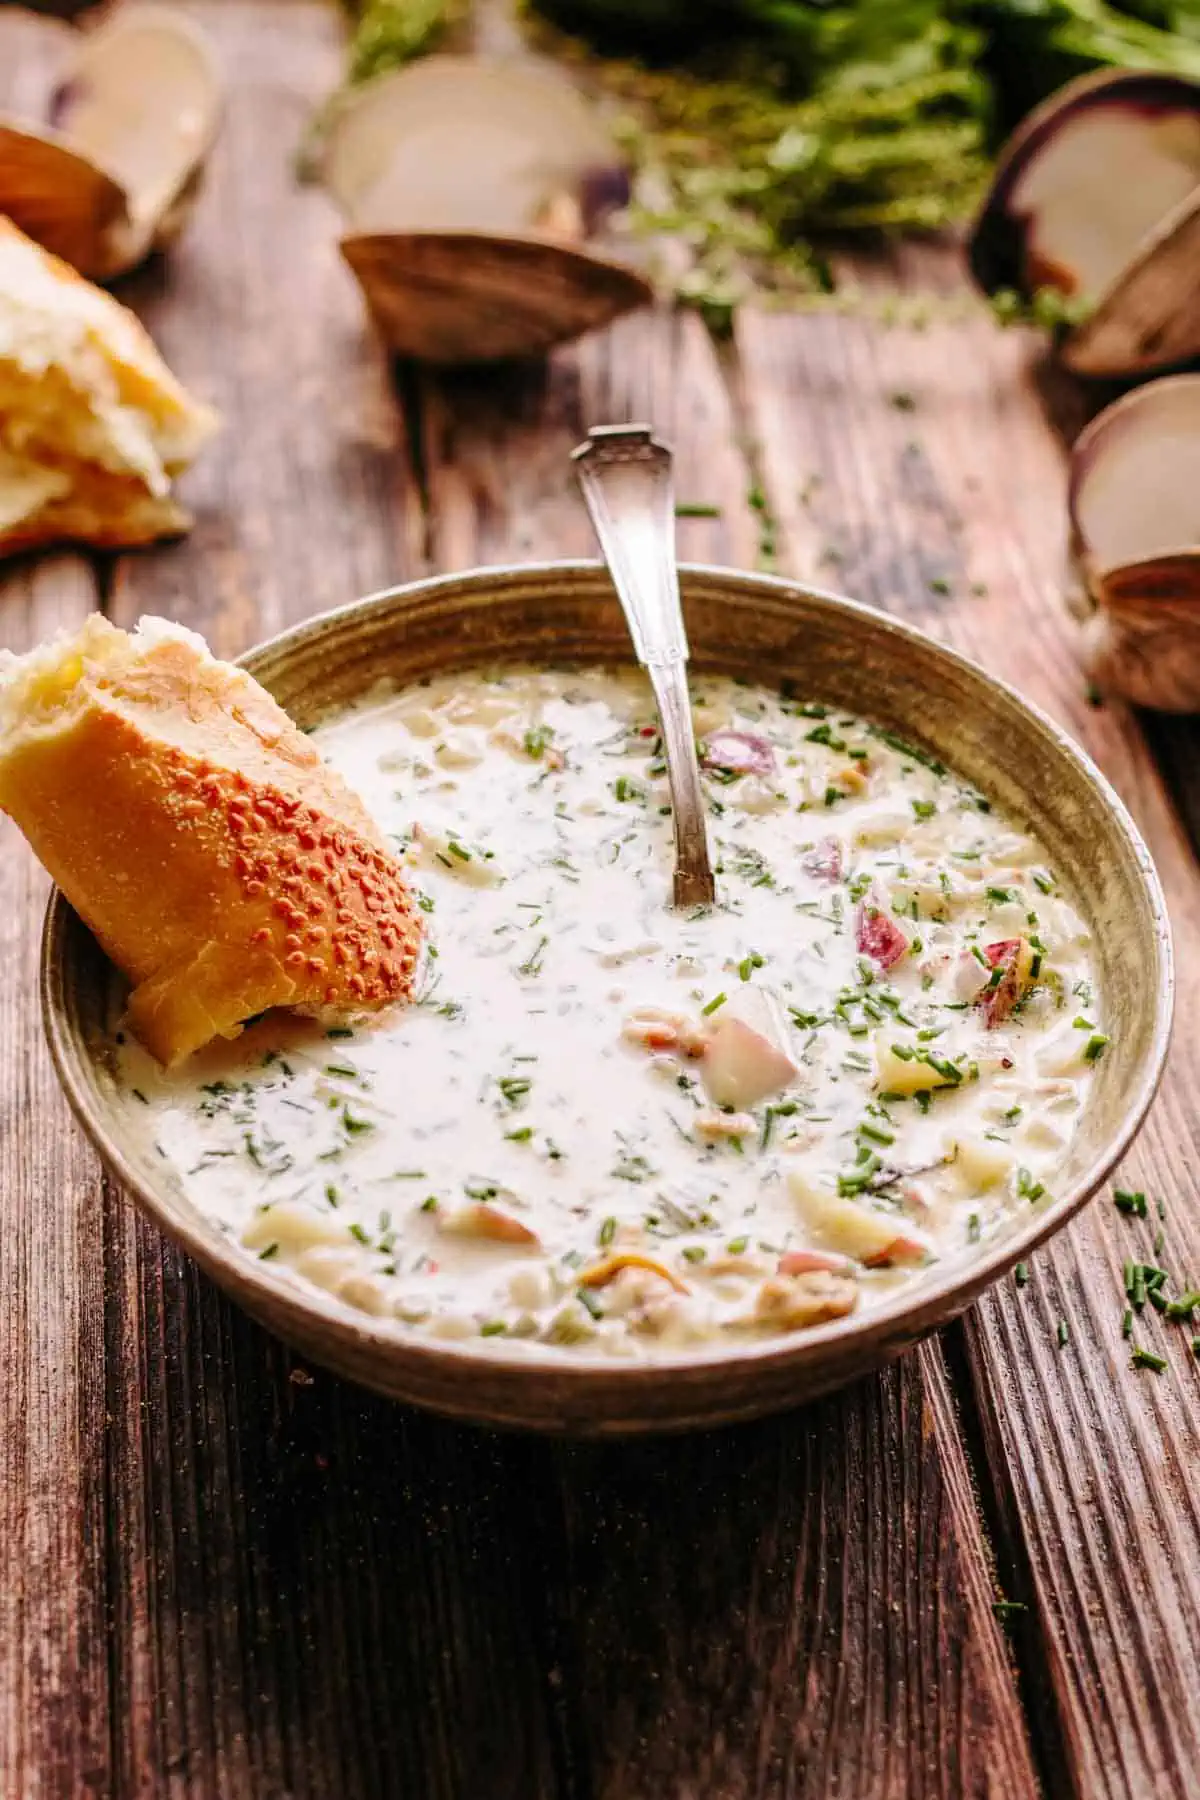 A bowl of New England clam chowder with a hunk of bread and a spoon.